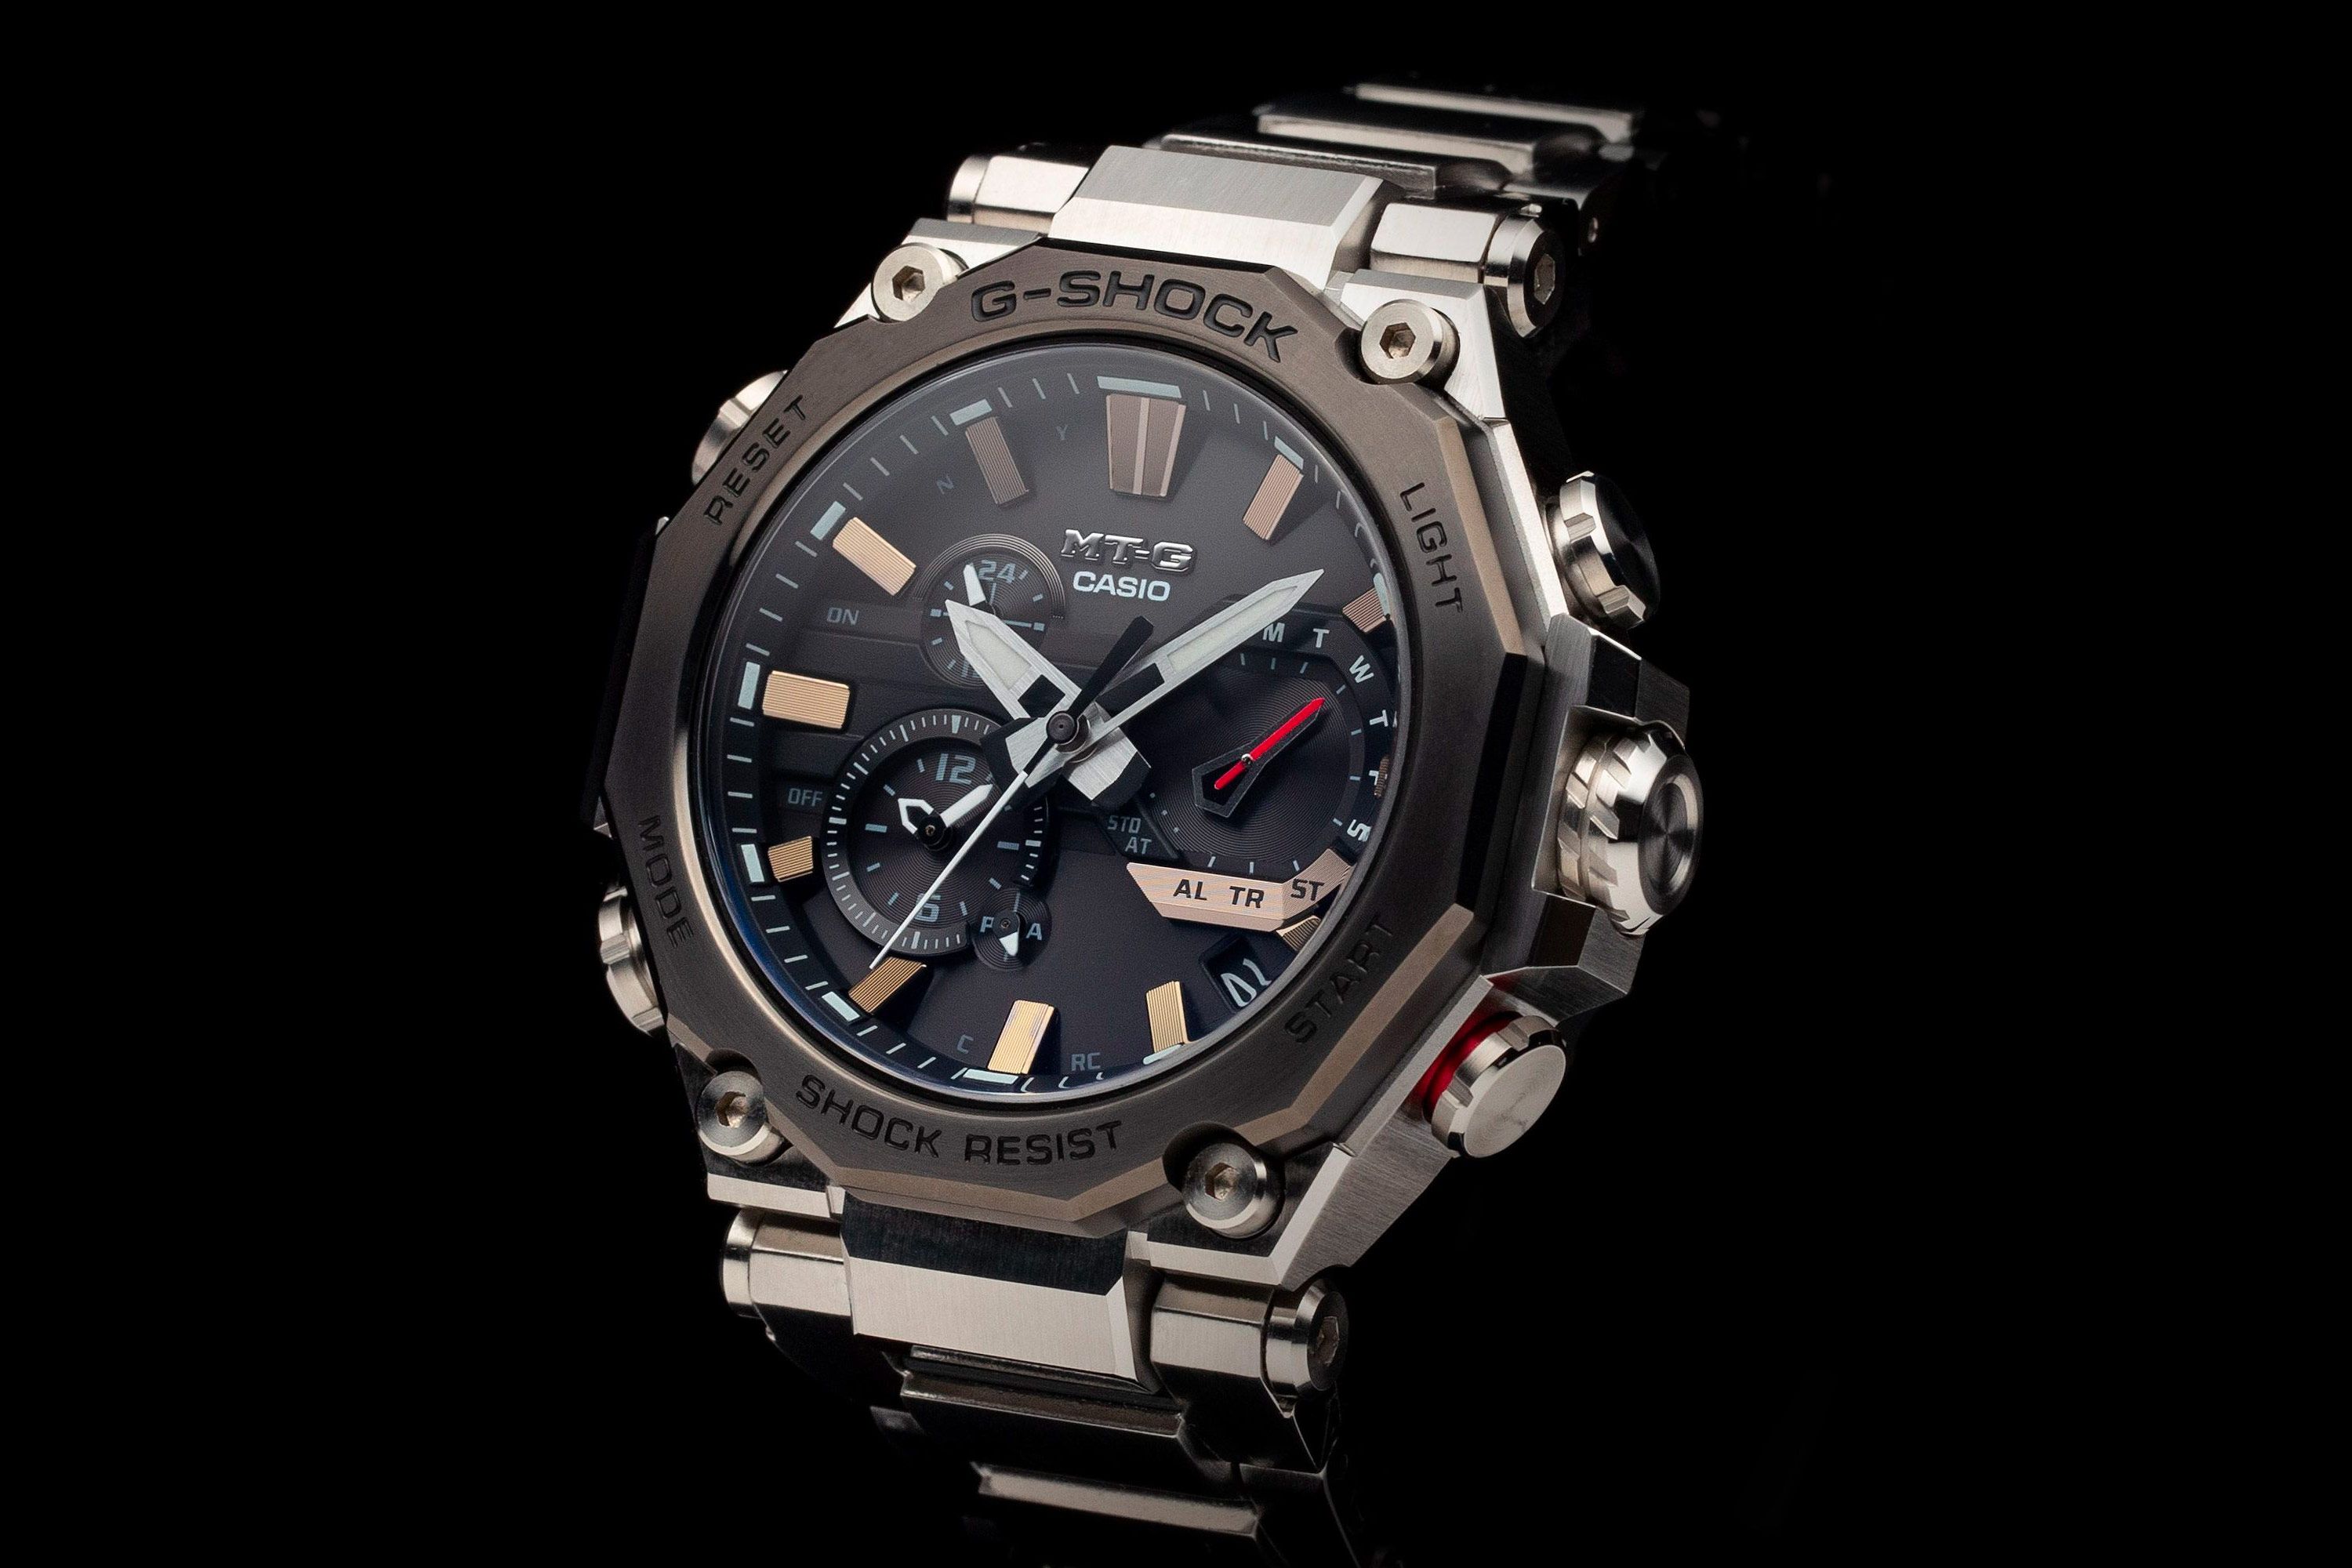 The Time Is Always Right with G SHOCK's MTG, MTGBDA